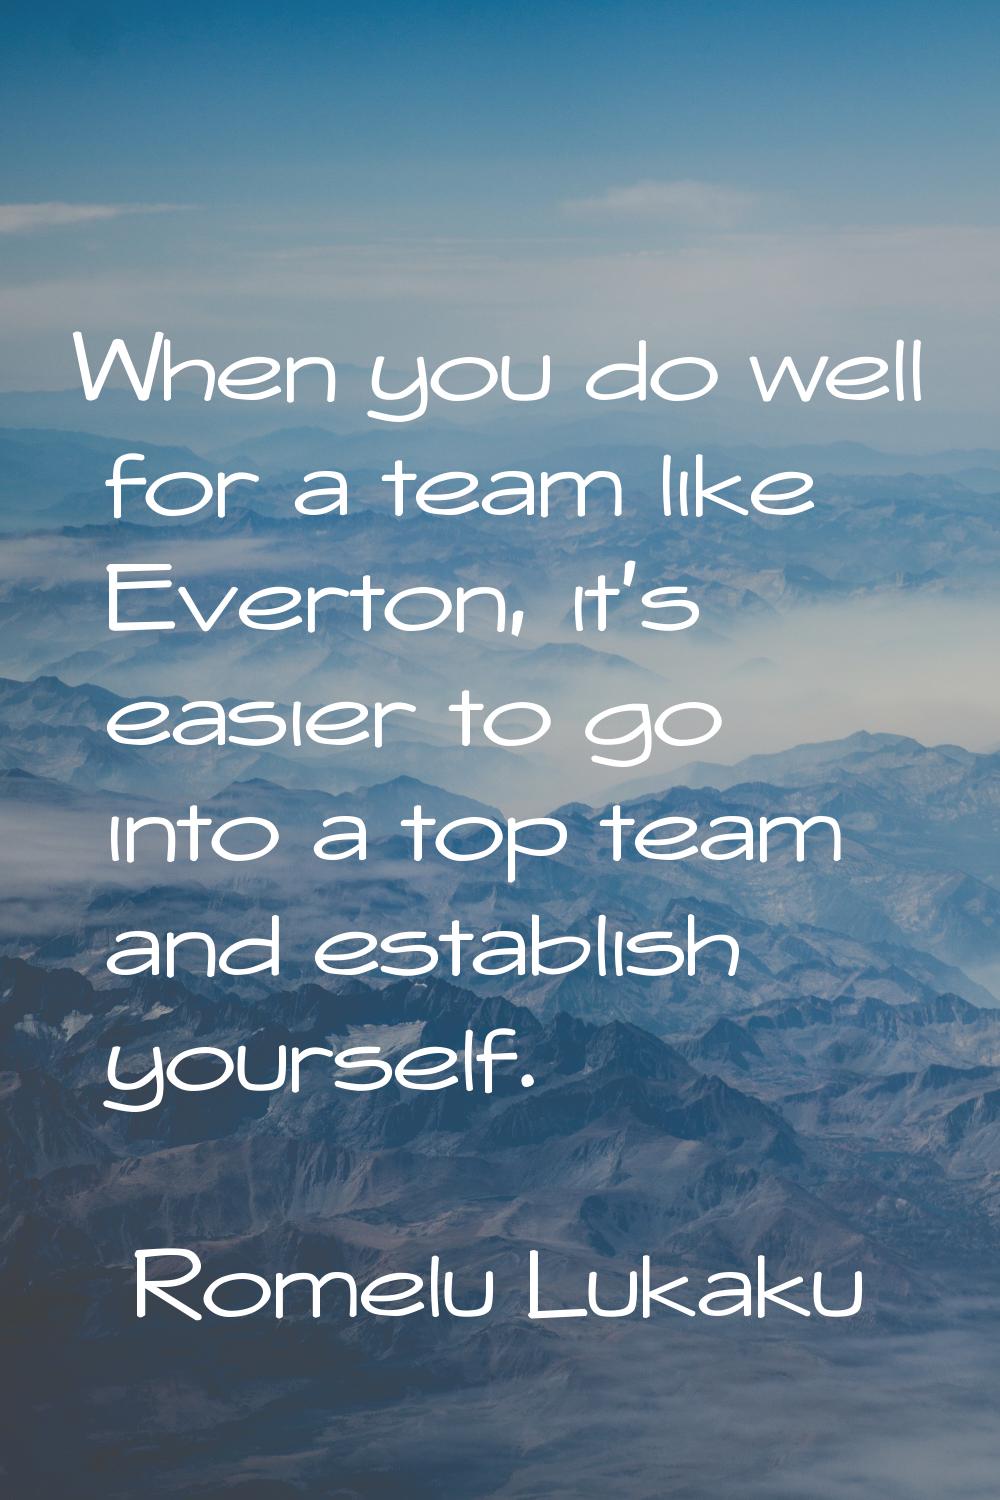 When you do well for a team like Everton, it's easier to go into a top team and establish yourself.